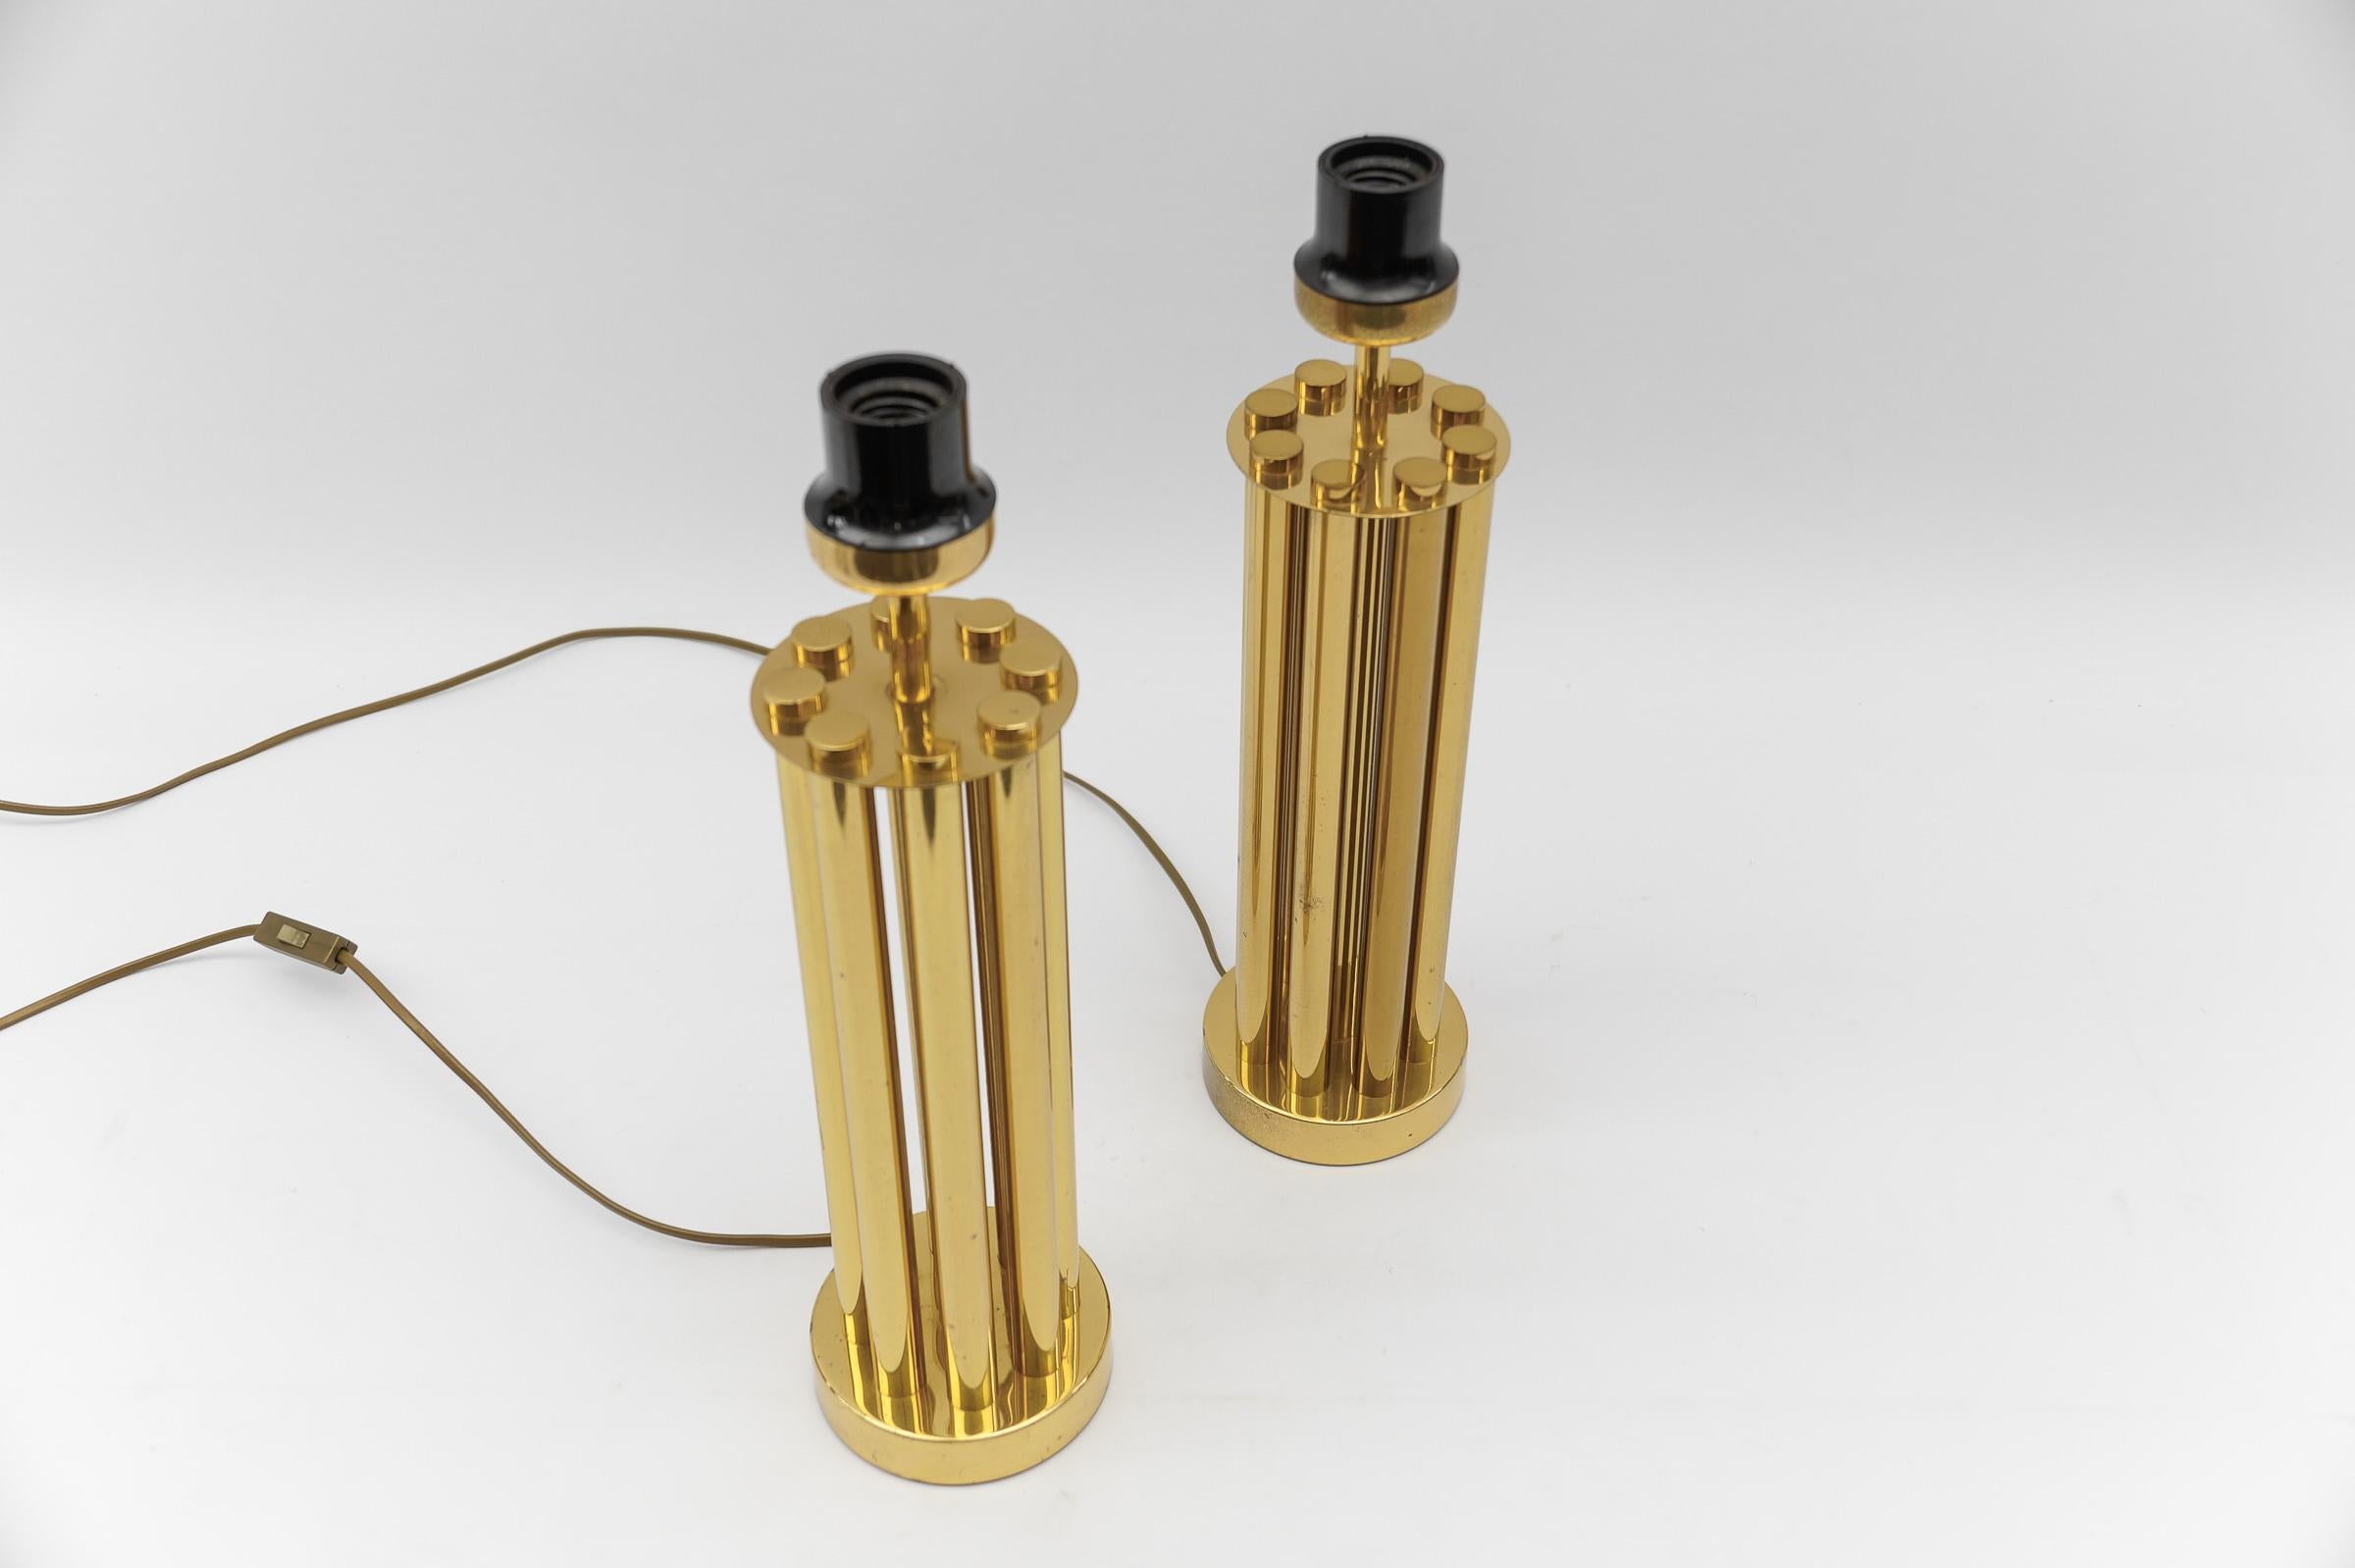 German Pair of Mid Century Modern Brass Table Lamp Bases, 1960s For Sale